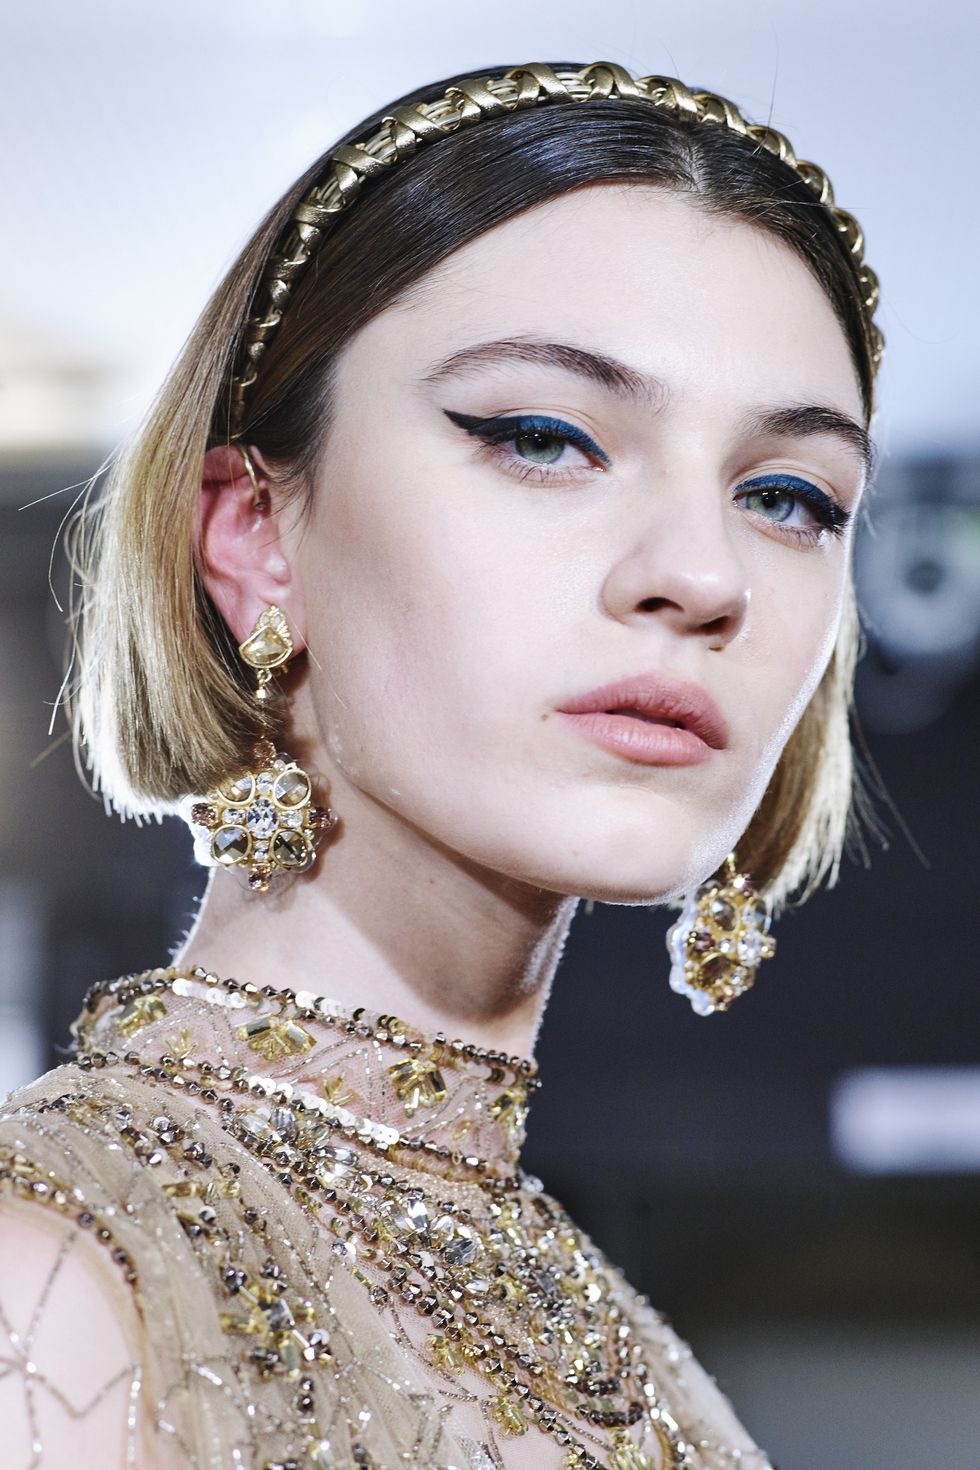 <p>At the Elie Saab Haute Couture show, models walked the runway with embellished headpieces, ornate&nbsp;jewelry, and blue-black eyeliner that referenced a modern day Princess Diana.</p>